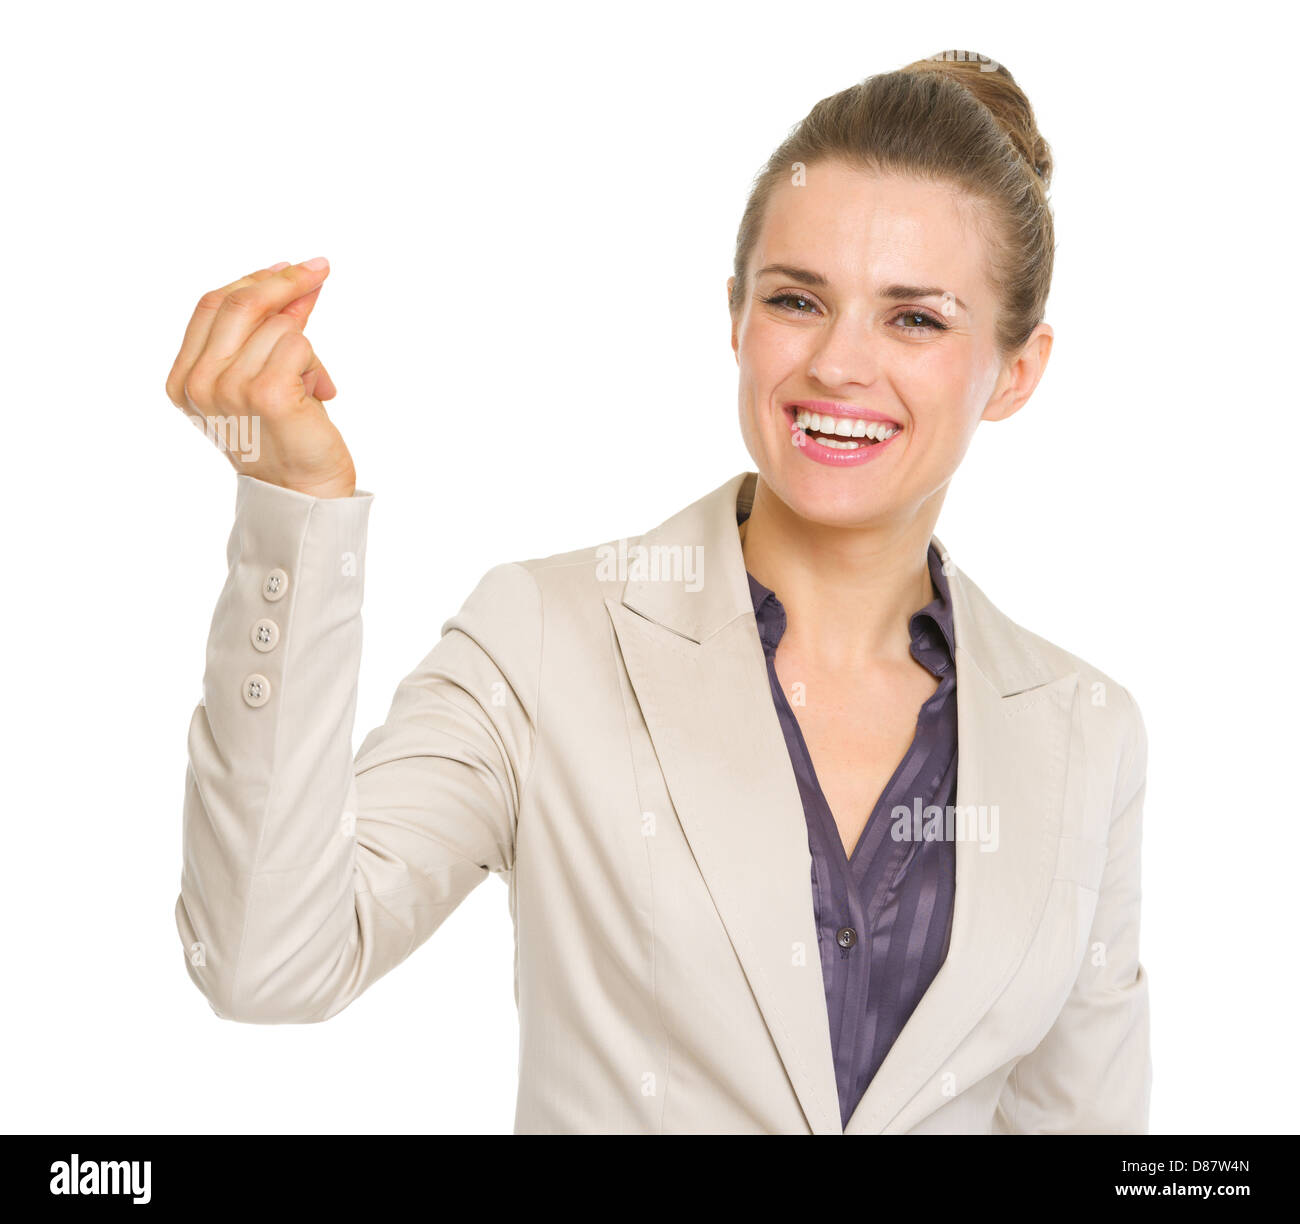 Smiling business woman snapping fingers Stock Photo